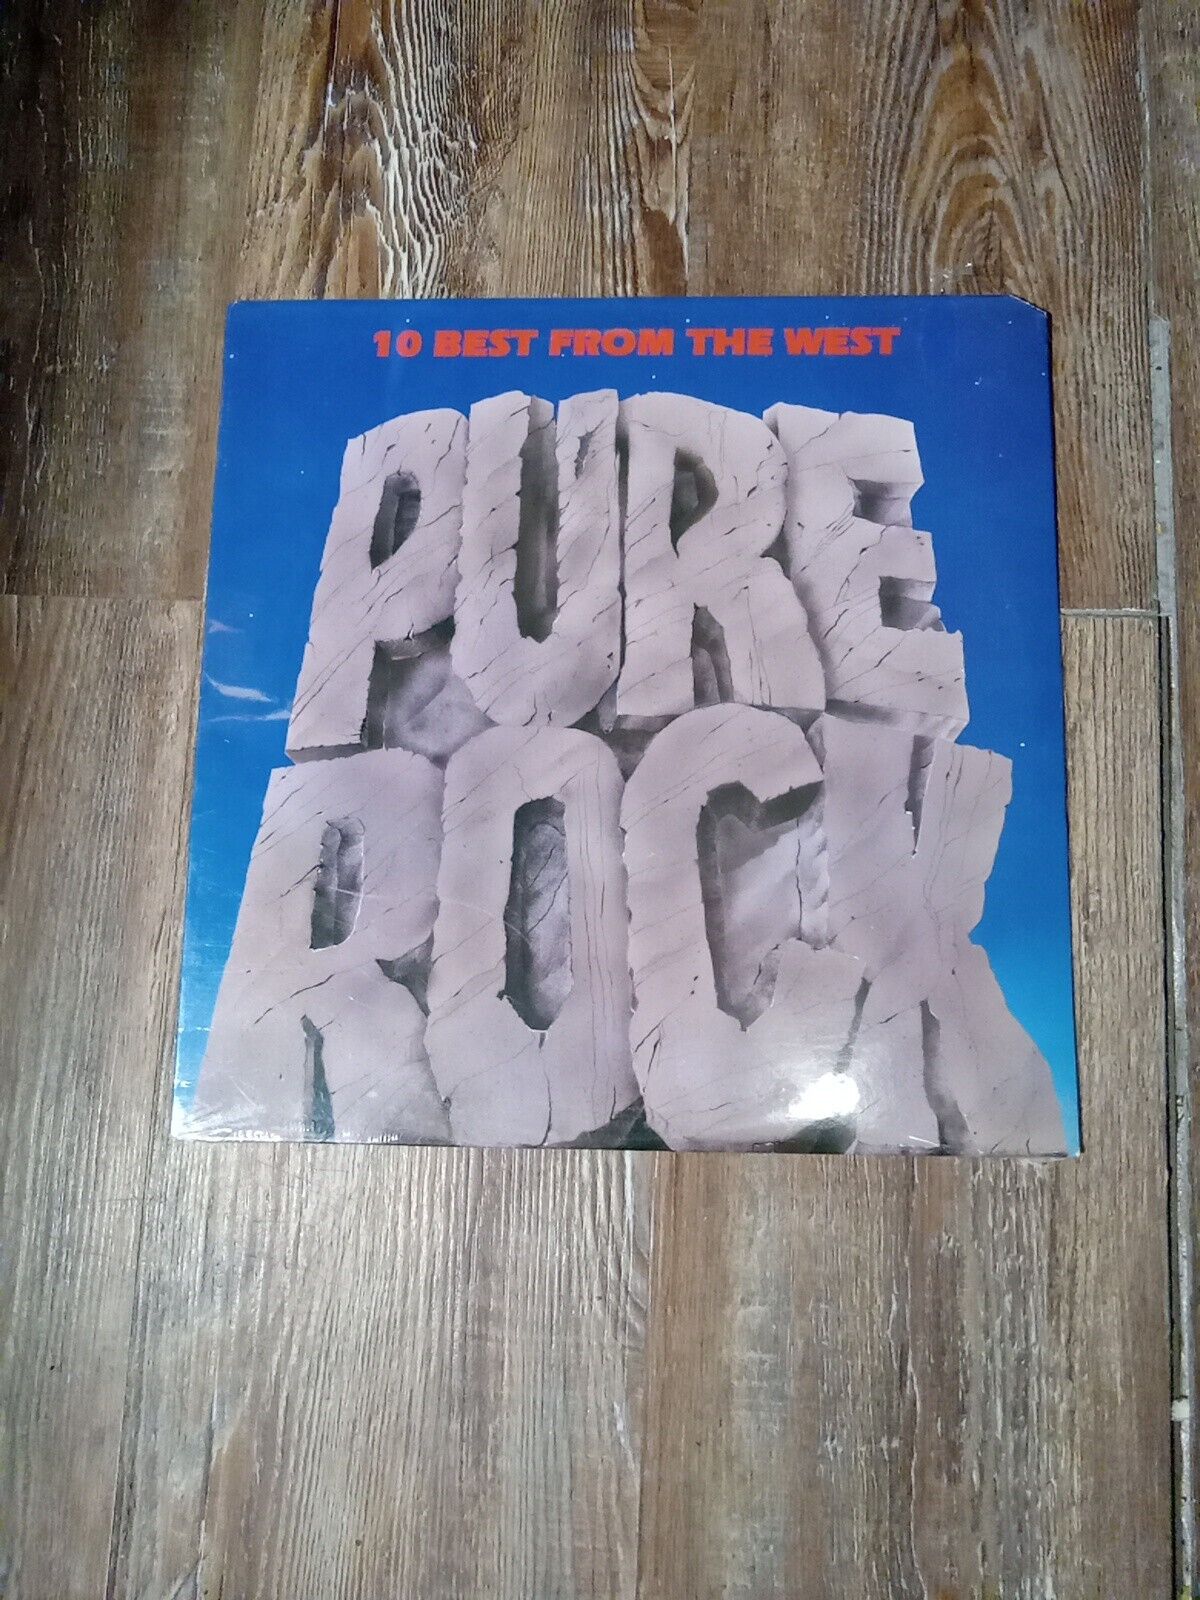 PURE ROCK 10 BEST FROM THE WEST LP 1987 Rampage RNLP 70082 NOS